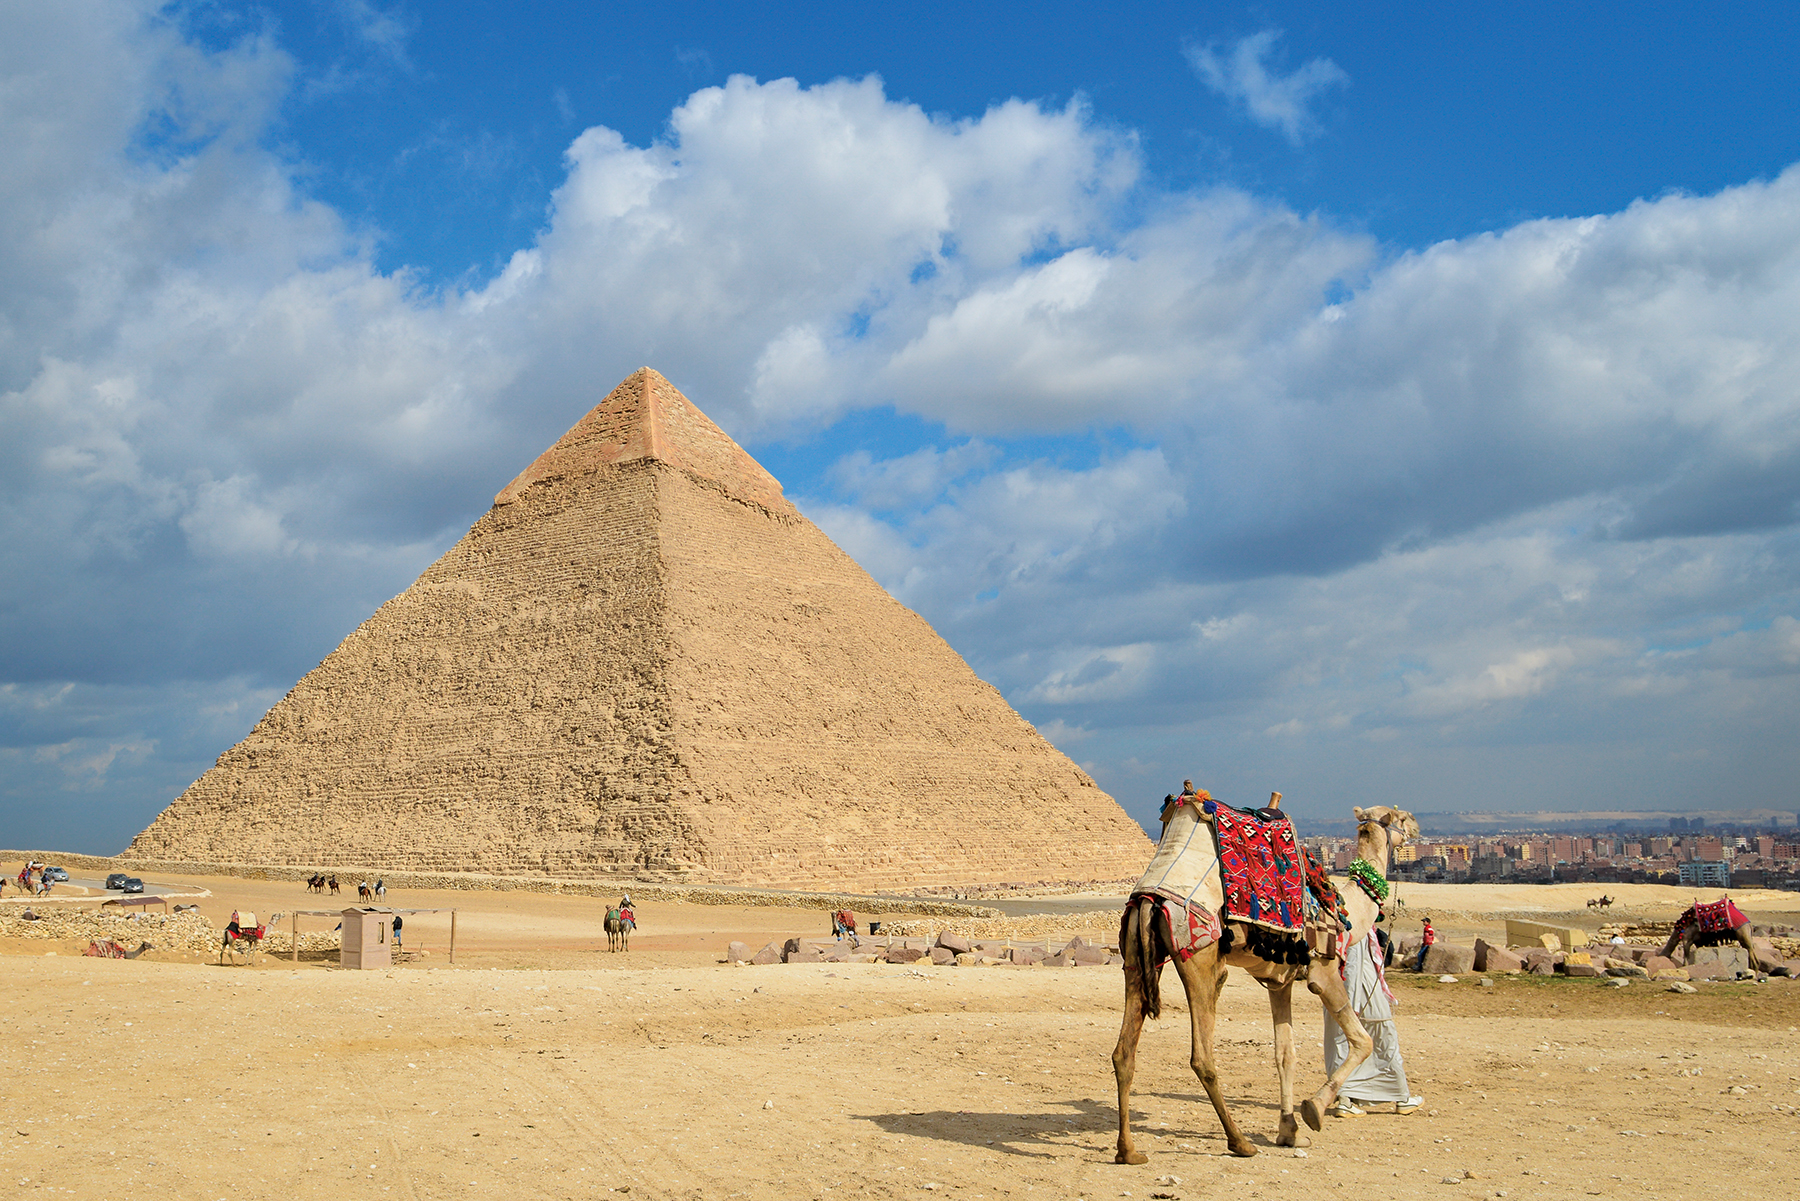 Picture of a pyramid in Egypt, with a person leading a camel into the desert. 